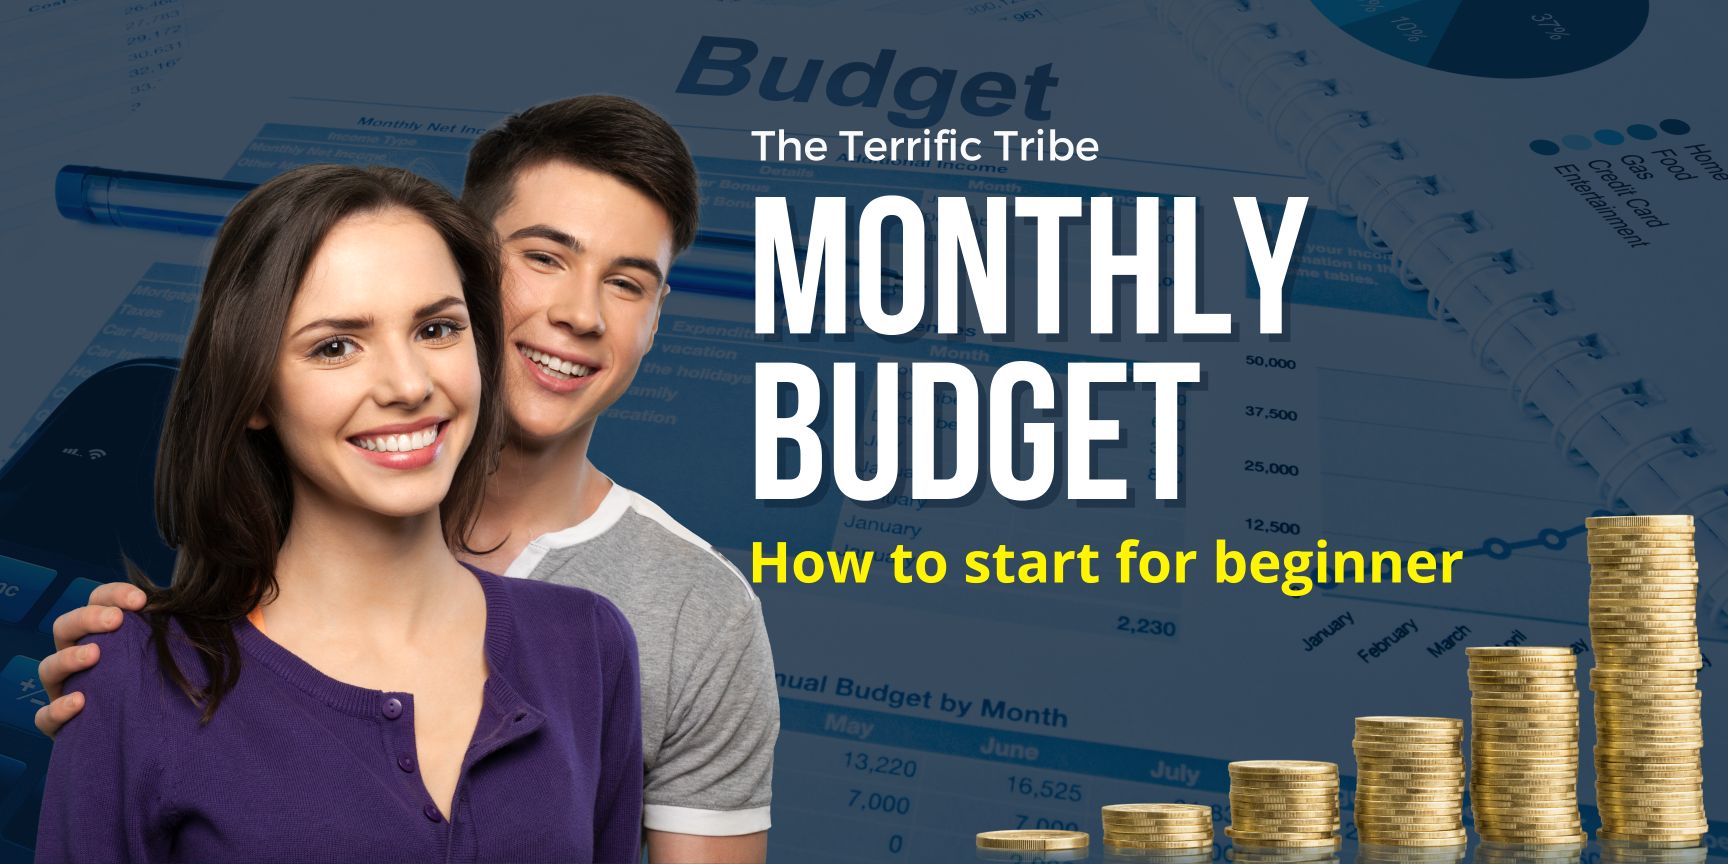 Monthly Budget: with 1 super resource for download.